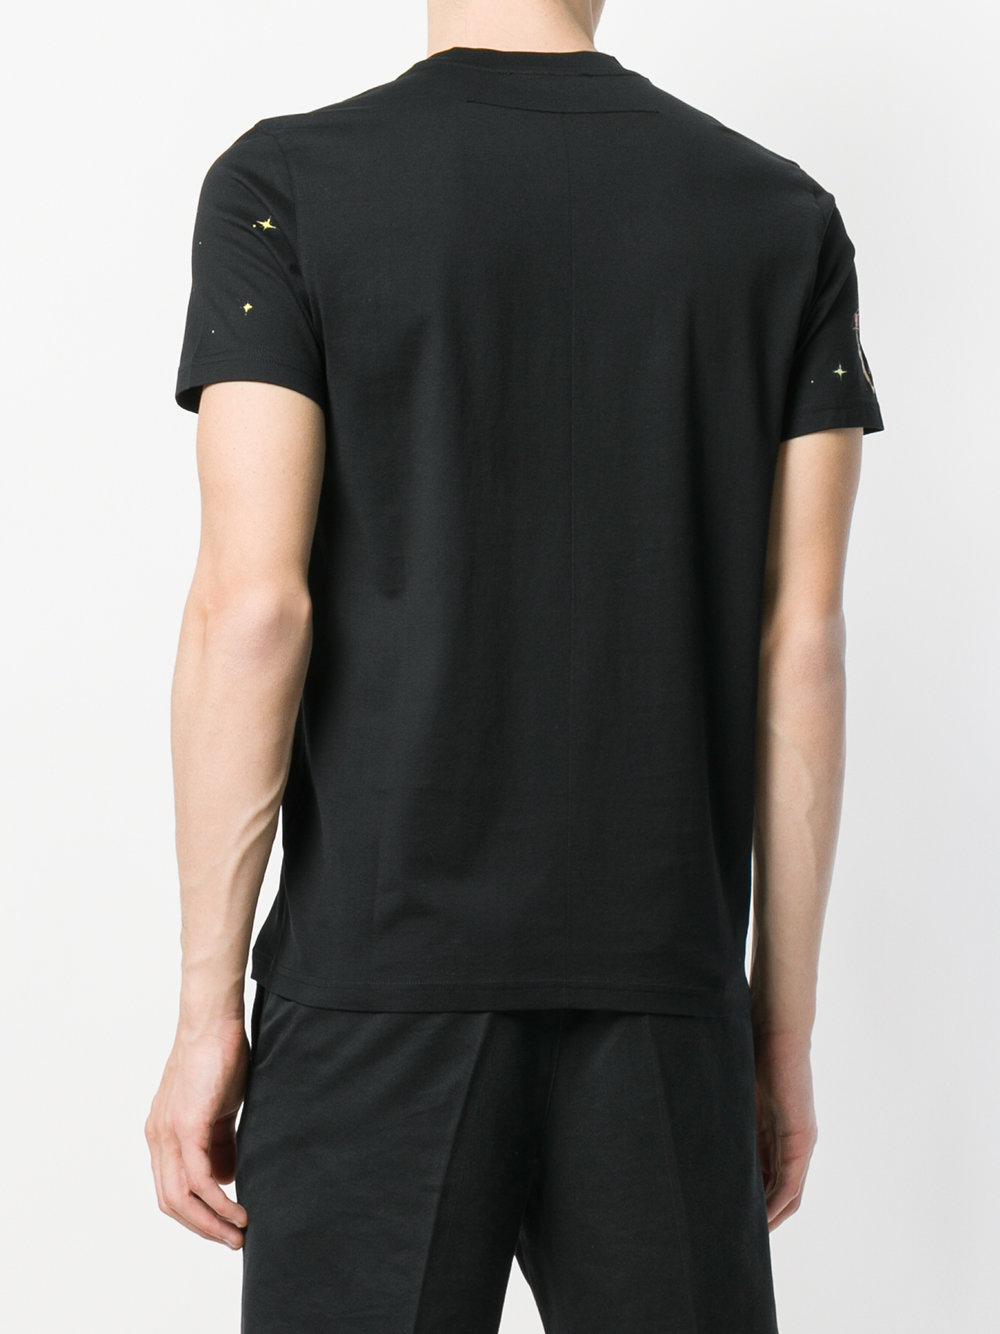 Givenchy Cotton Underworld Print T-shirt in Black for Men - Lyst